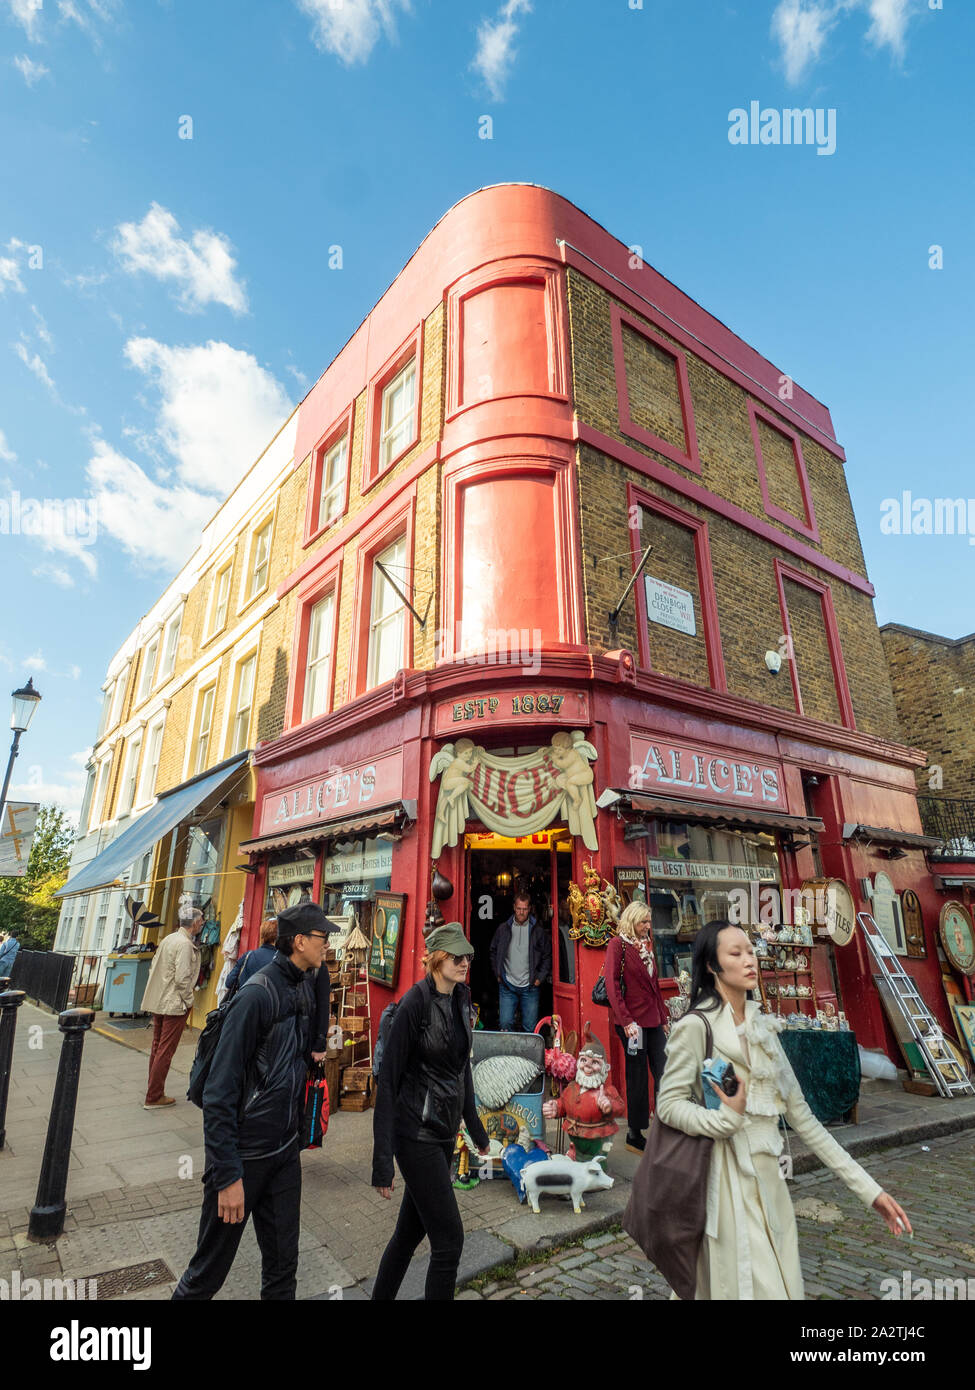 Alice's antique & curiosity shop (as featured in the film 'Paddington'), on the corner of Portabello road, Notting Hill, London. Stock Photo